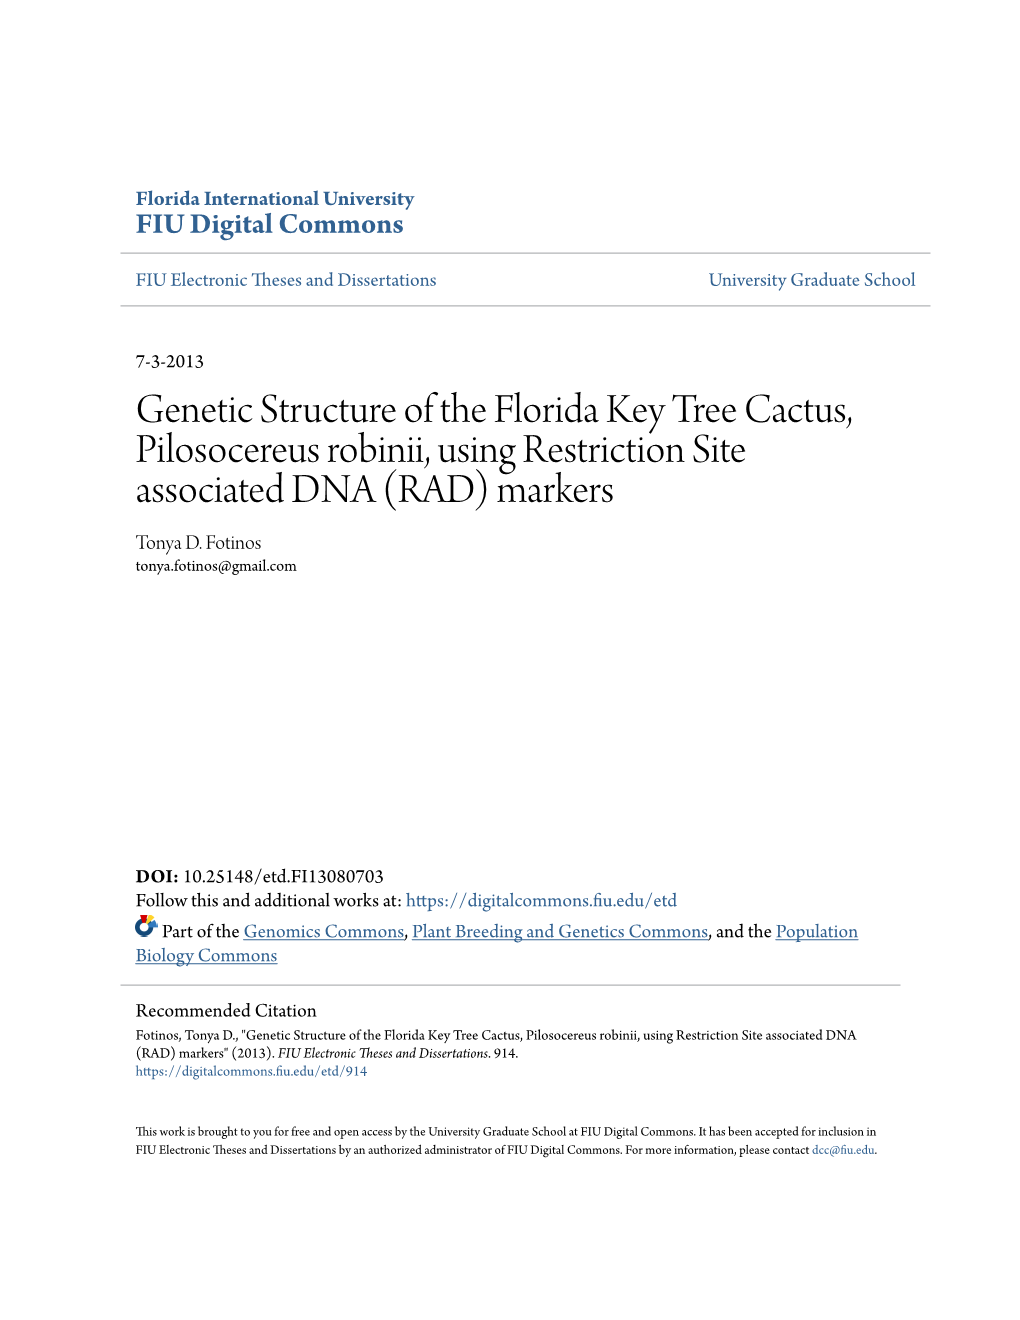 Genetic Structure of the Florida Key Tree Cactus, Pilosocereus Robinii, Using Restriction Site Associated DNA (RAD) Markers Tonya D